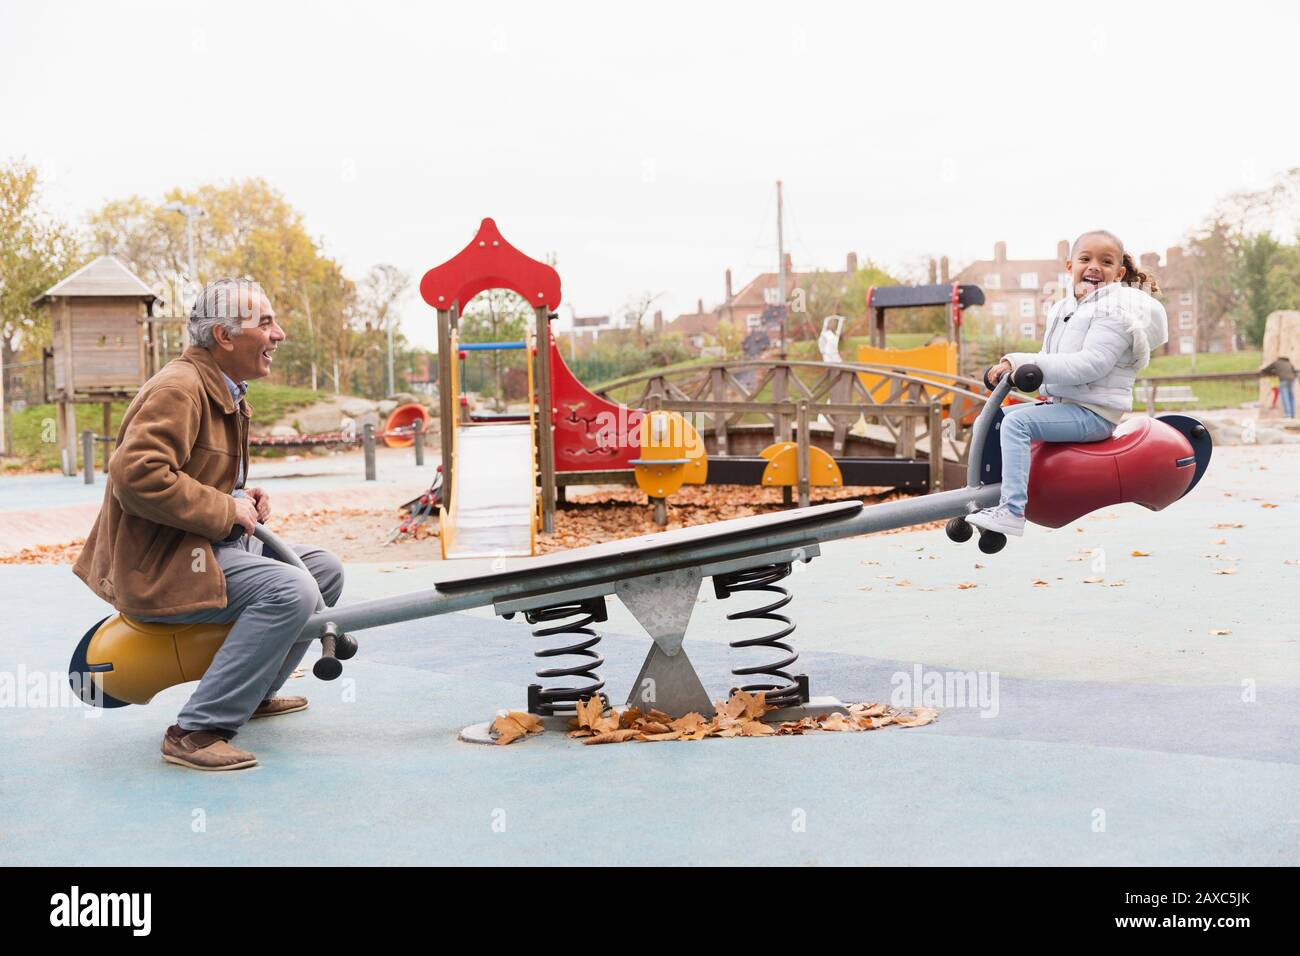 Grandfather and granddaughter playing on seesaw at playground Stock Photo